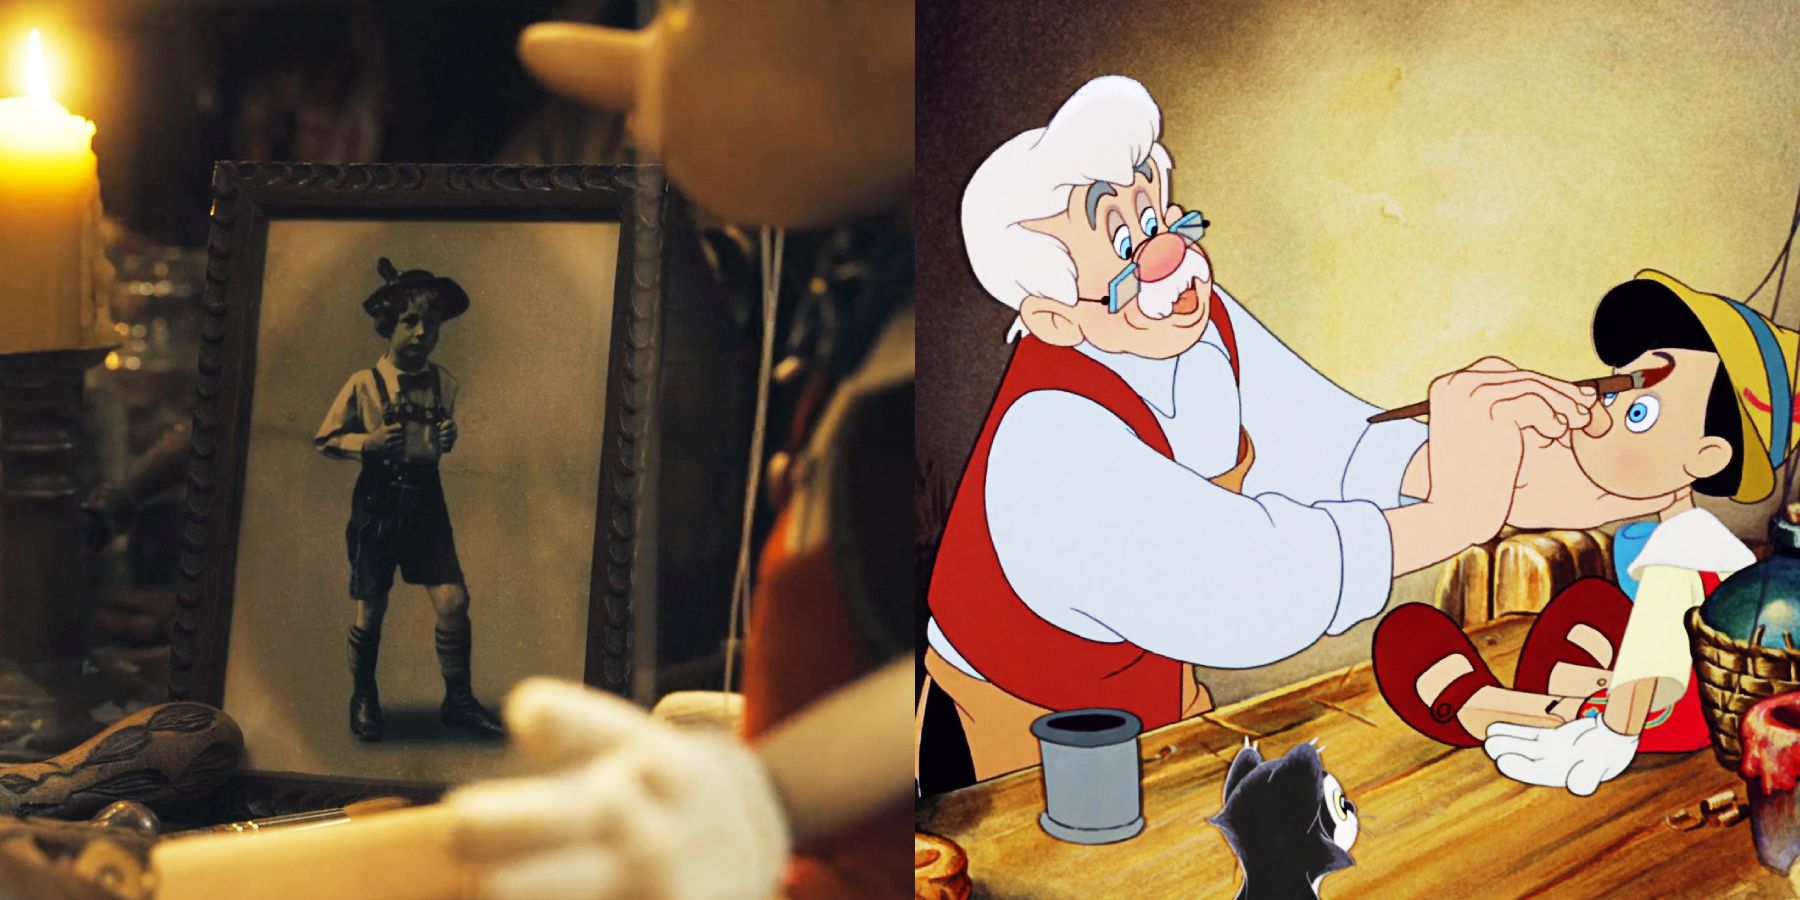 Tom Hanks' Geppetto has a tragic backstory in the Pinocchio remake